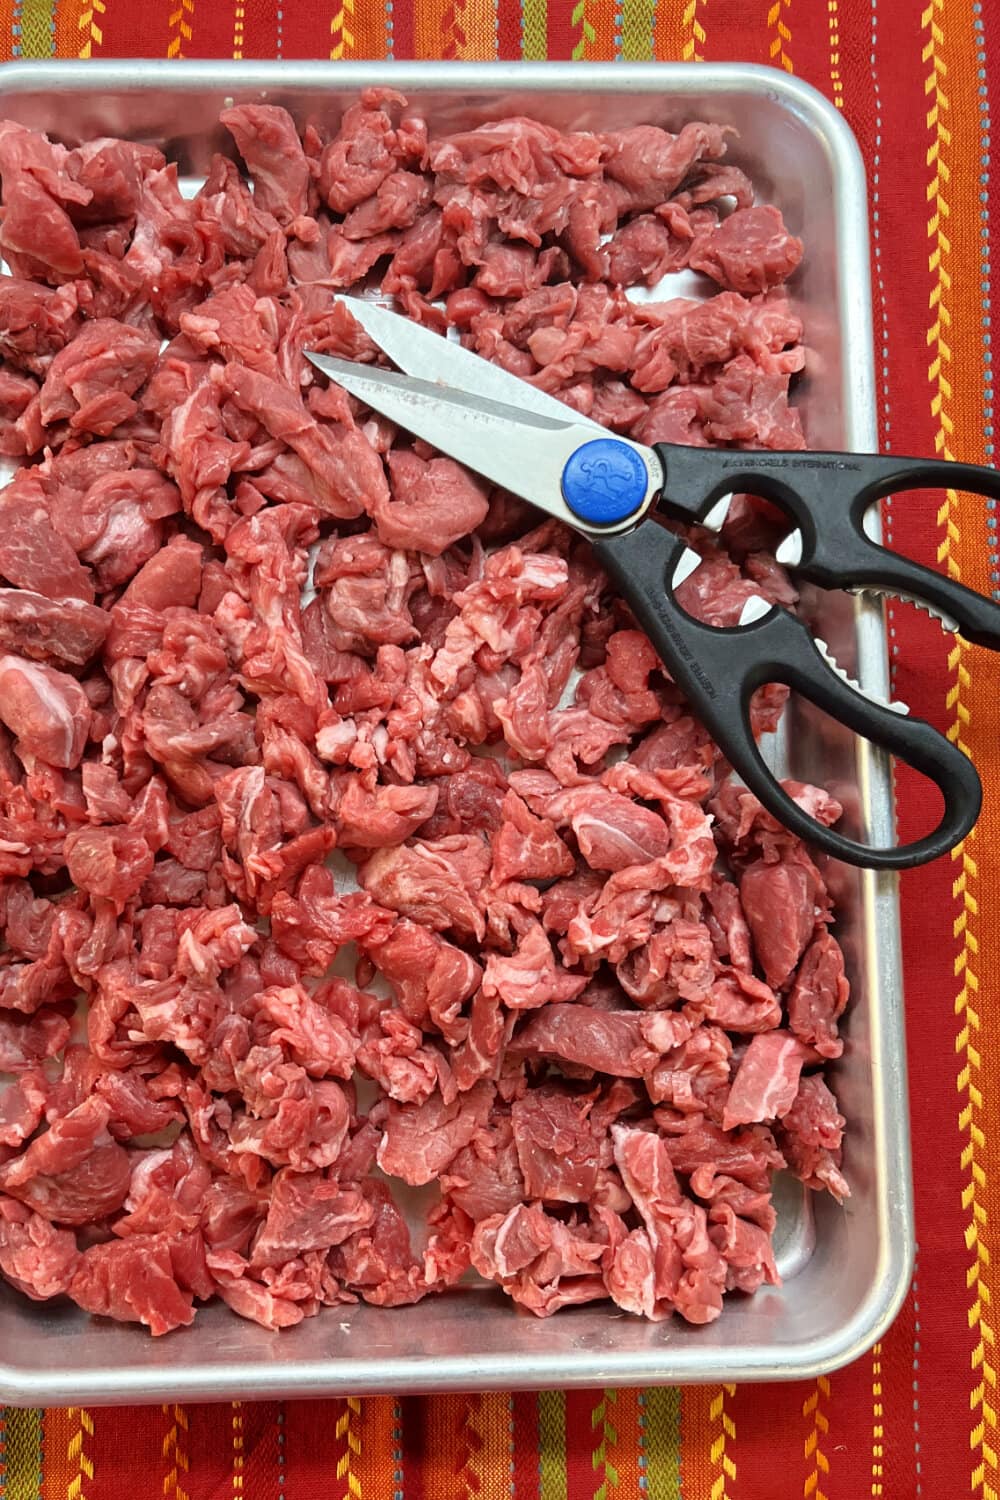 Minced beef on a baking sheet with kitchen shears. 